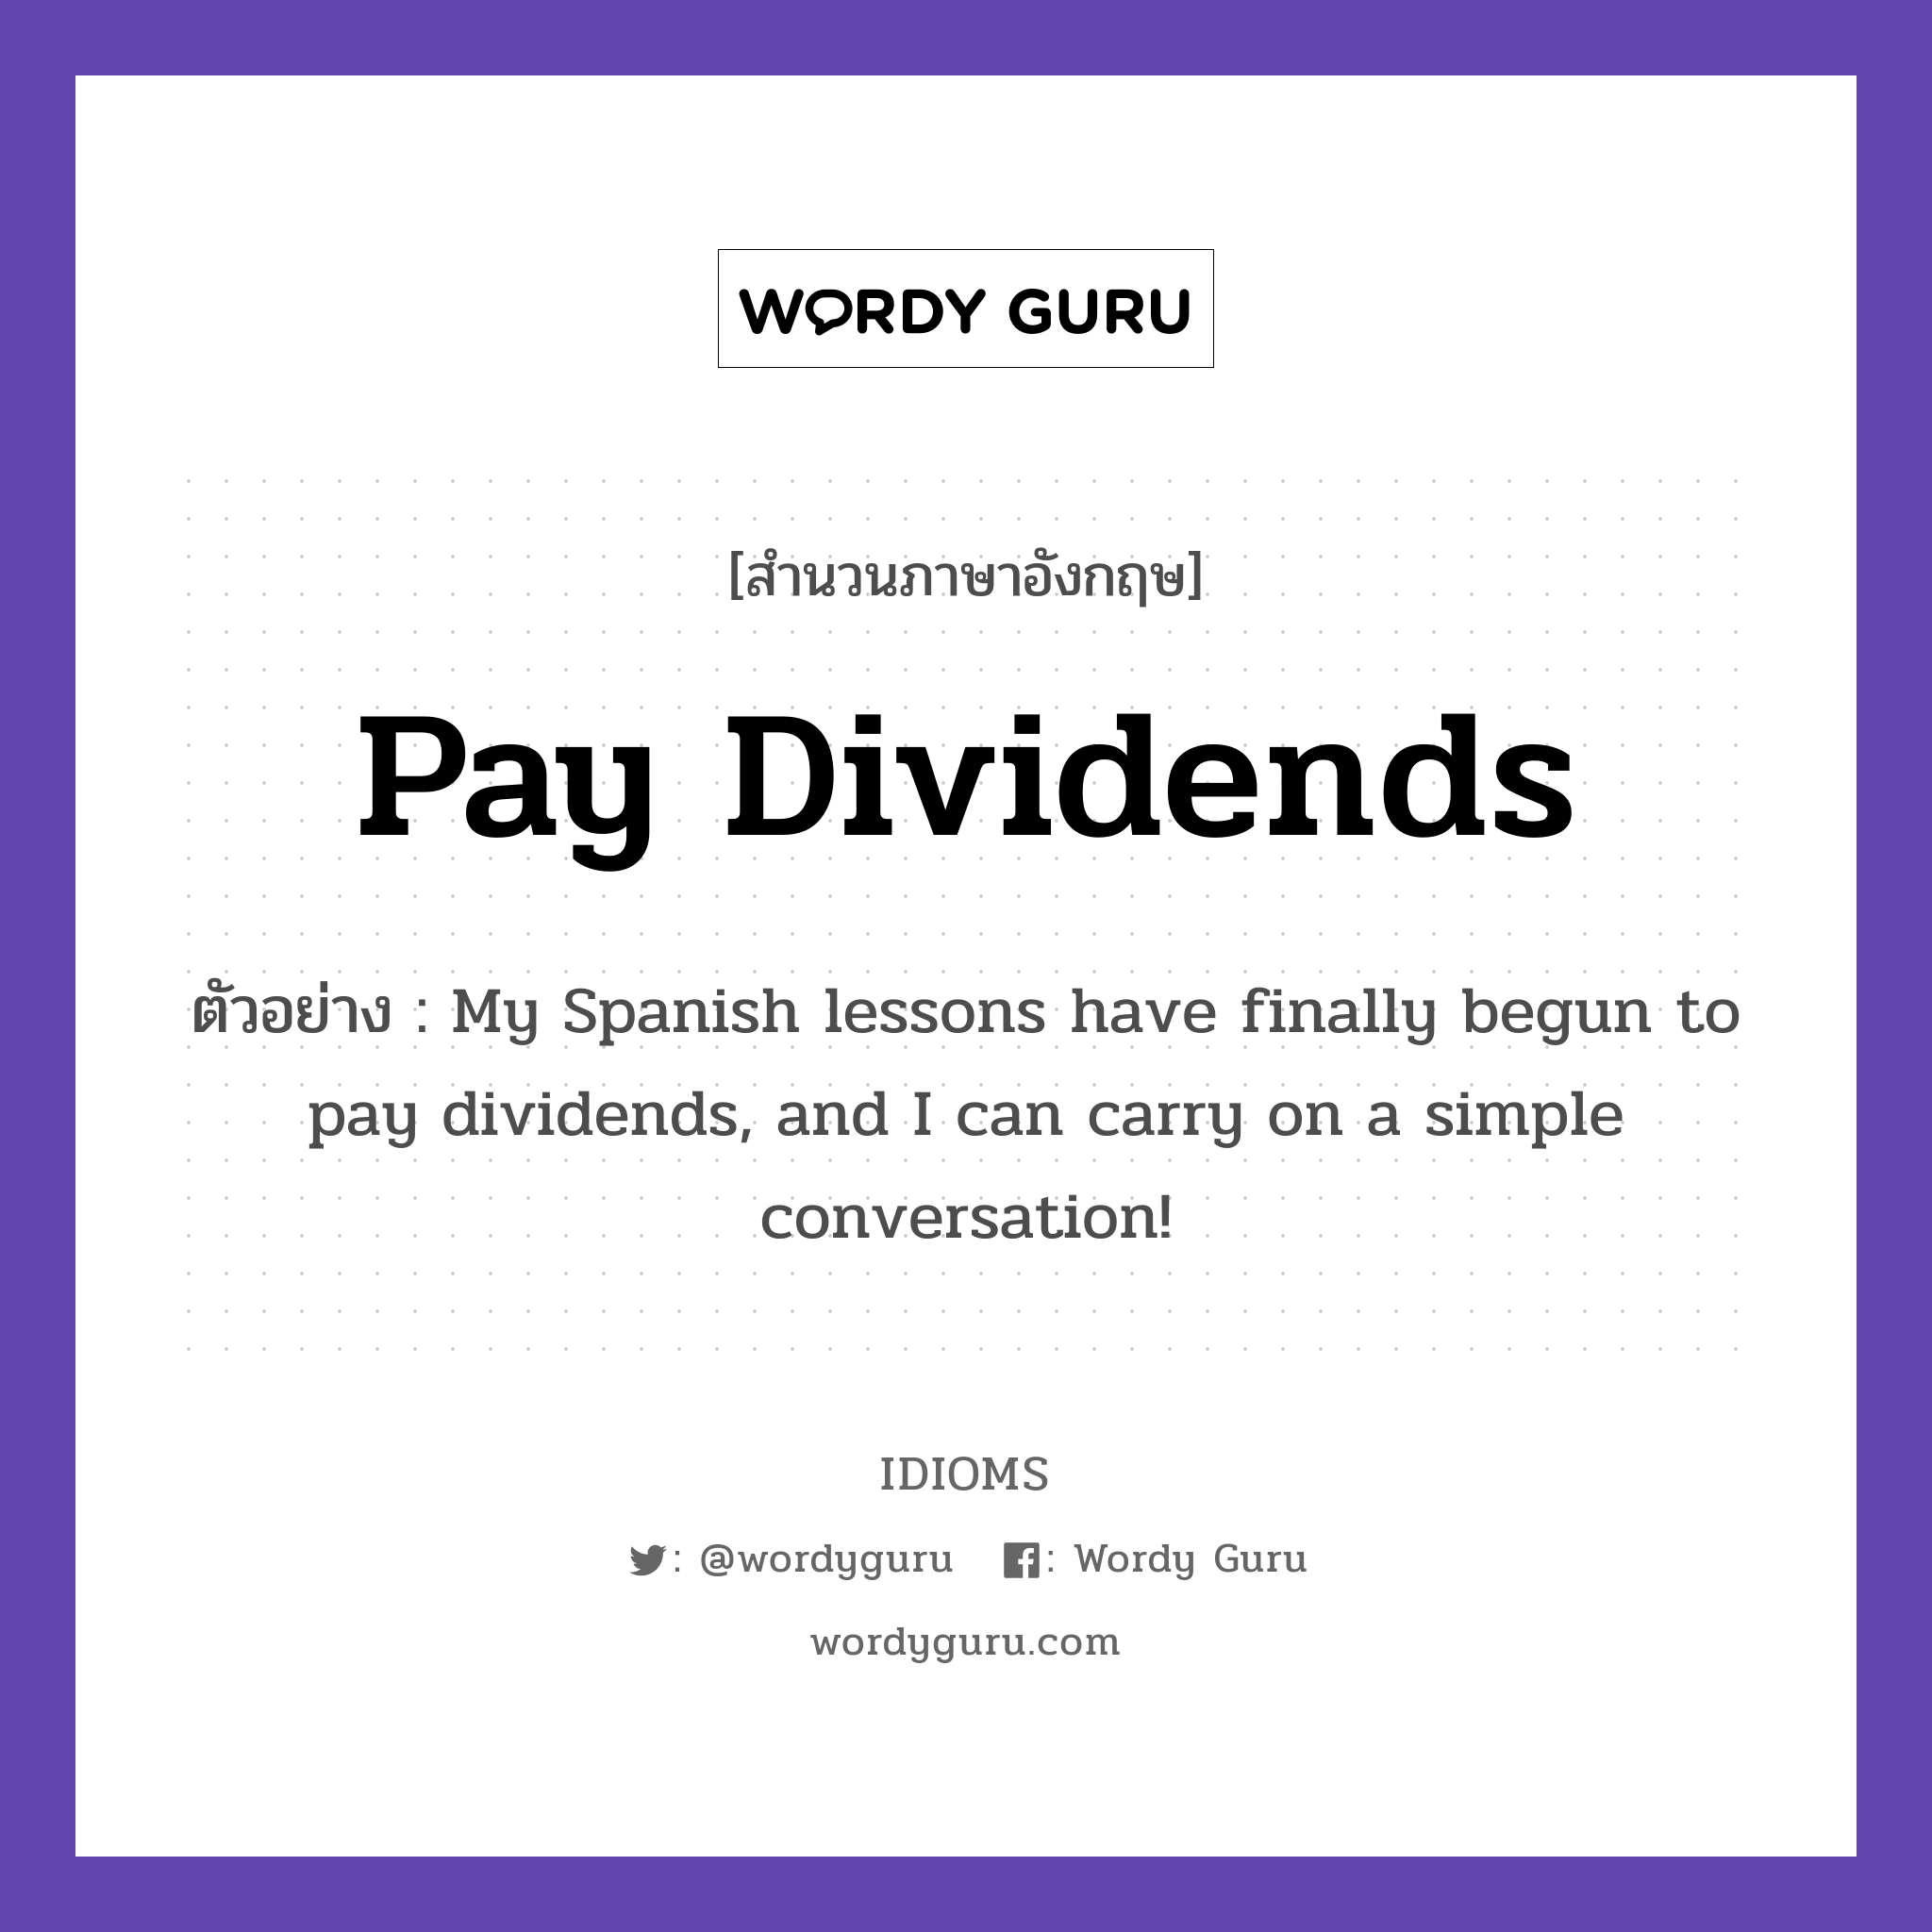 pay dividends แปลว่า?, สำนวนภาษาอังกฤษ pay dividends ตัวอย่าง My Spanish lessons have finally begun to pay dividends, and I can carry on a simple conversation!